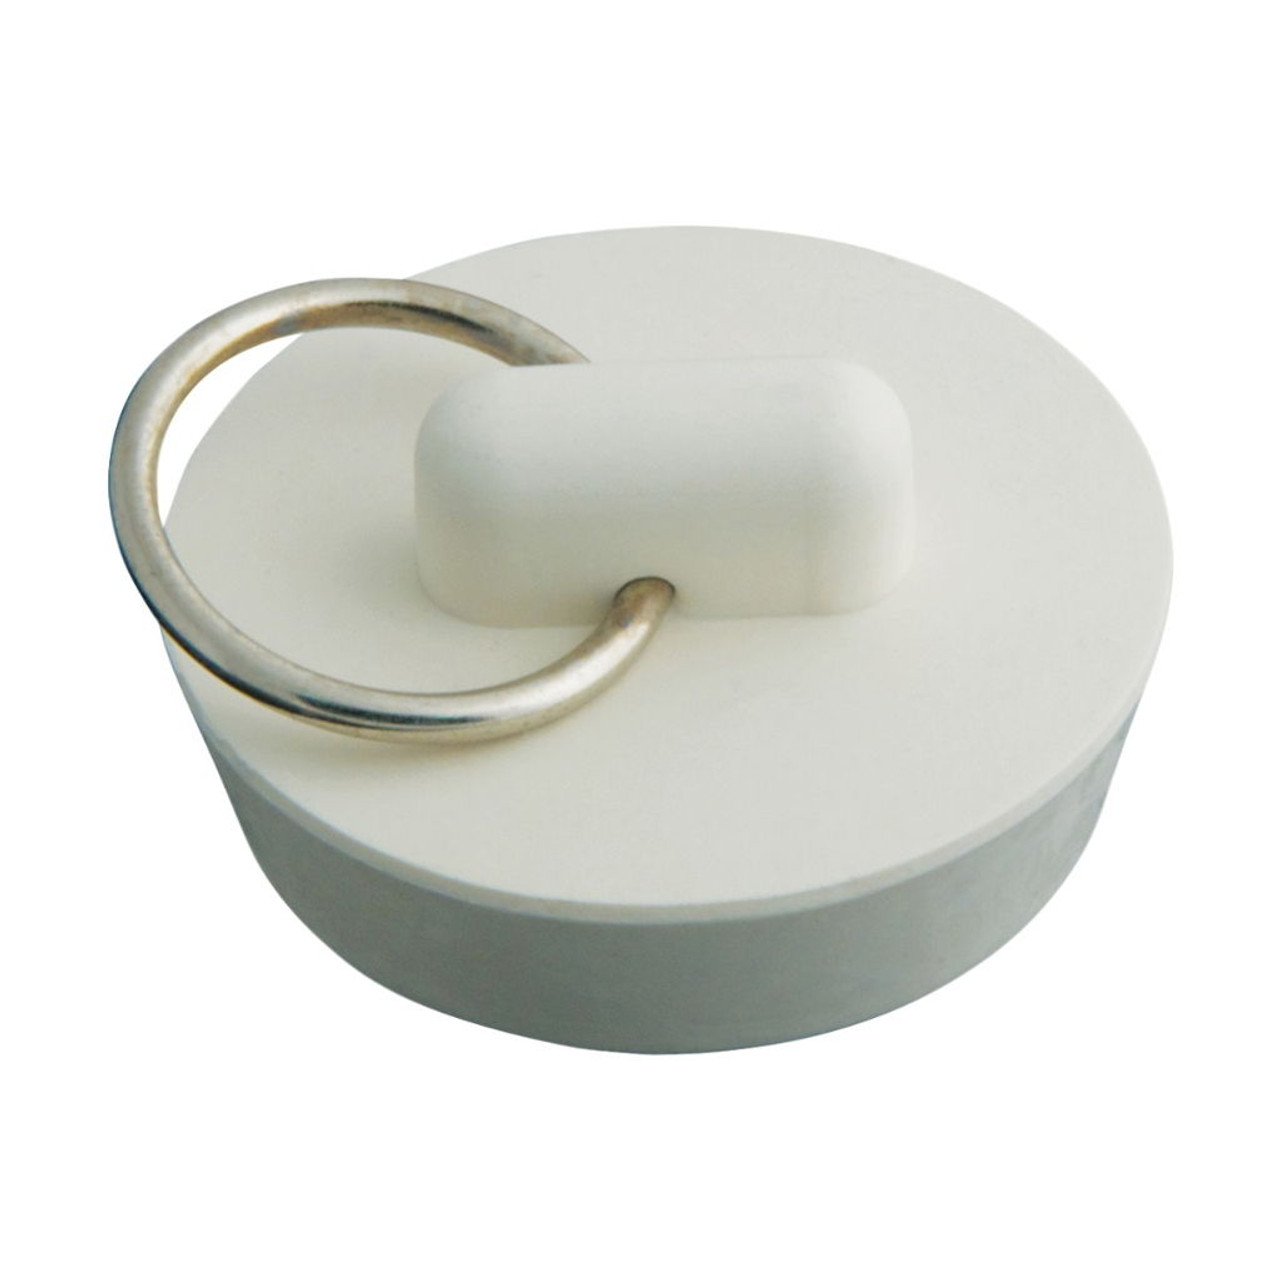 Master Plumber 714-637 Rubber Sink Stopper with Metal Ring, White